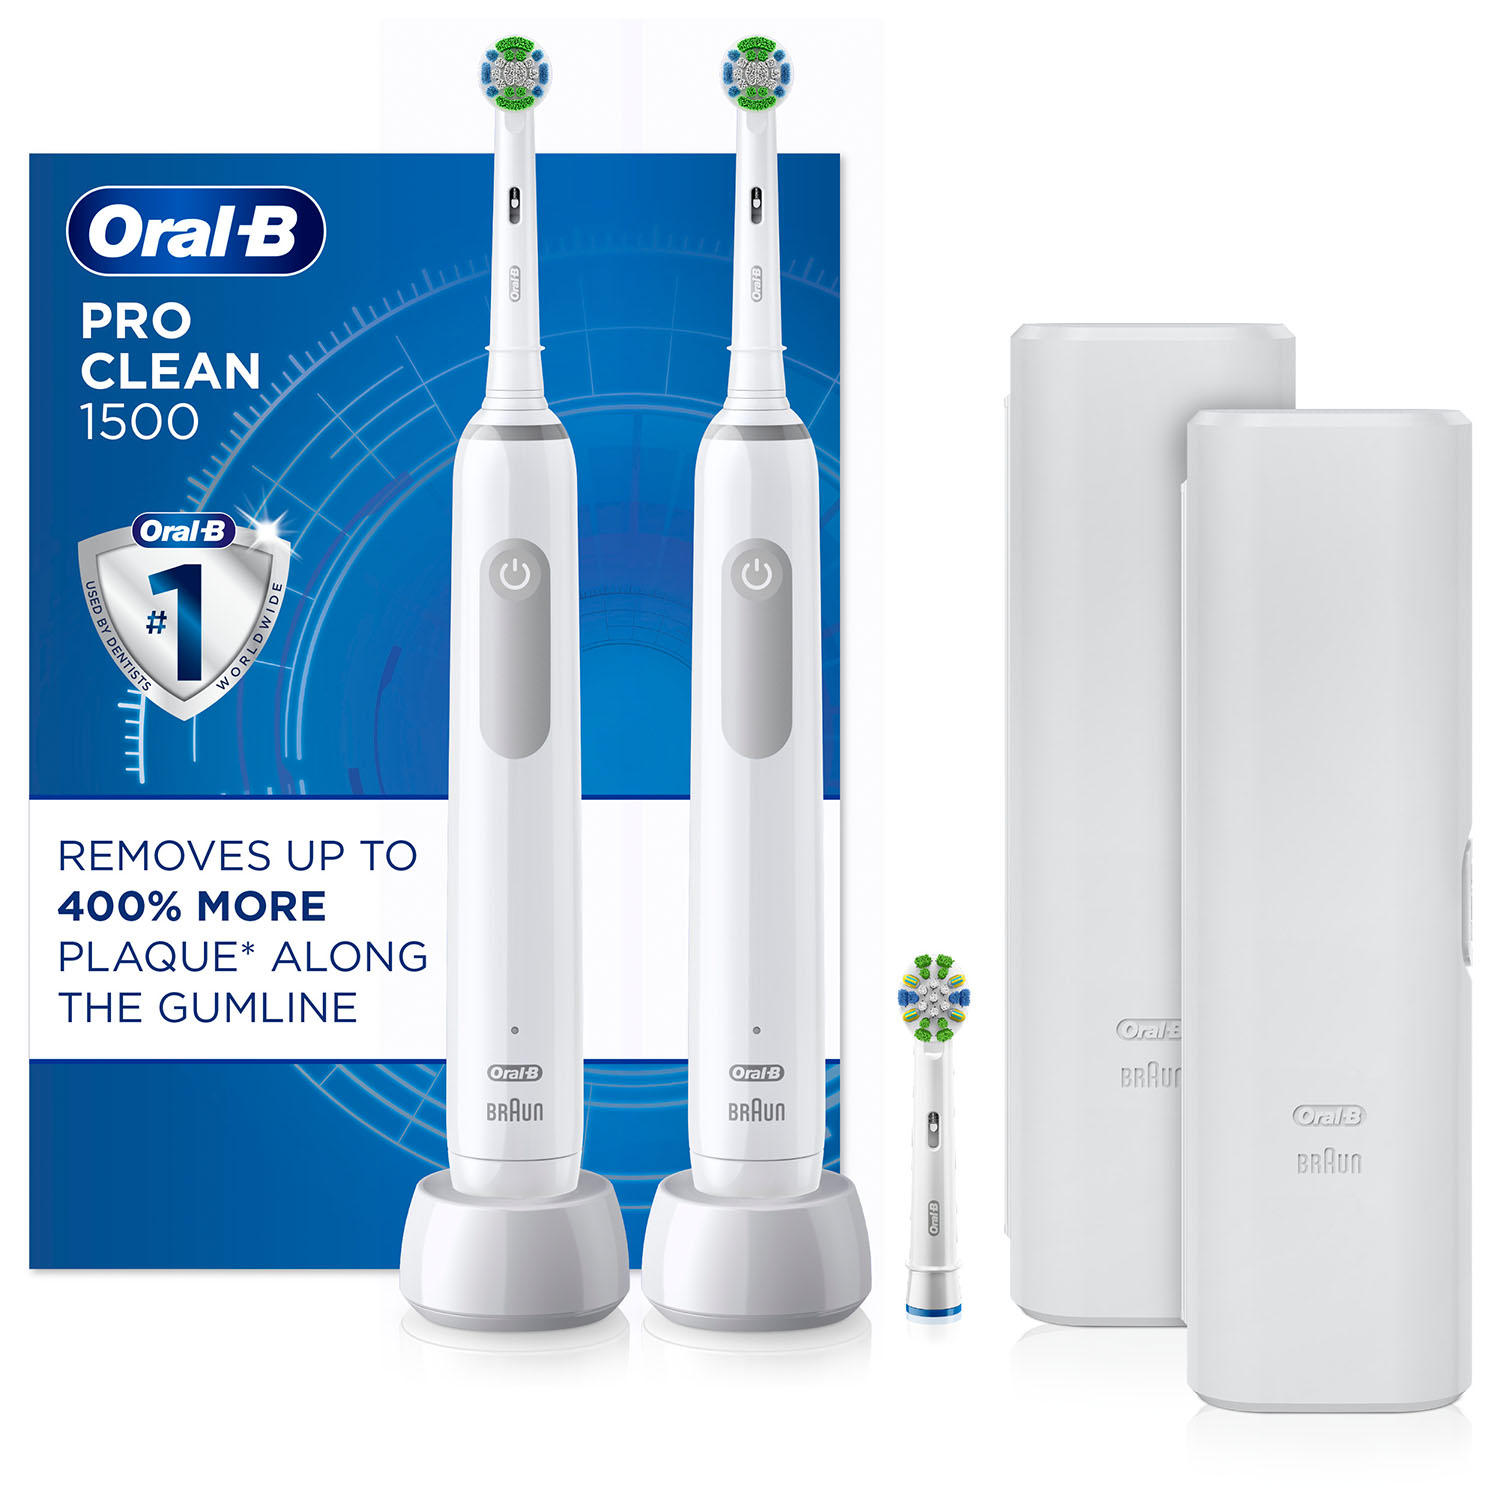 Oral-B Pro Clean 1500 Rechargeable Electric Toothbrush, White (2 pk.) $49.98